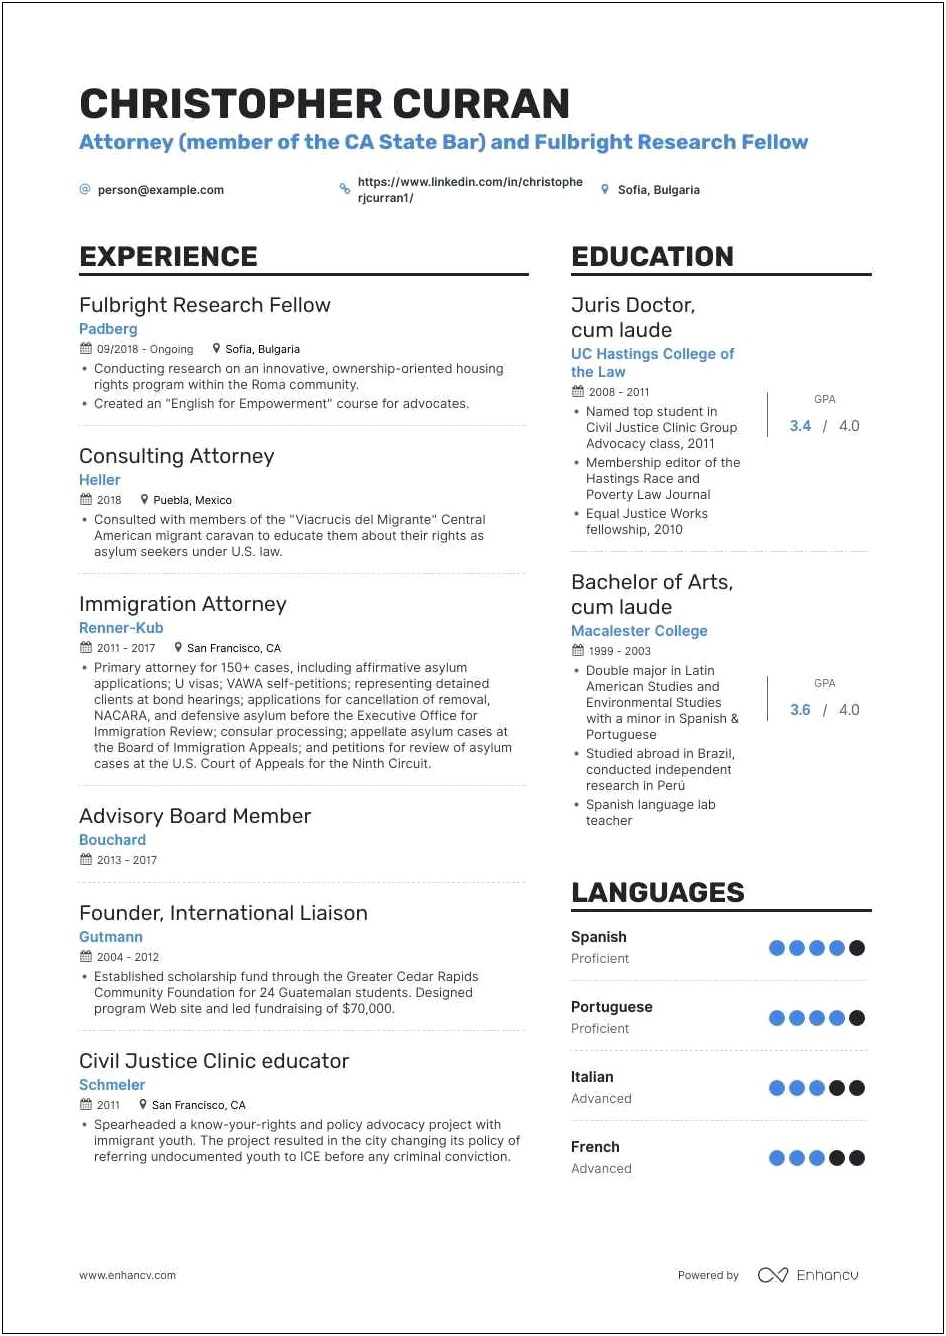 Resume Of Professor With Project Consultant Experience